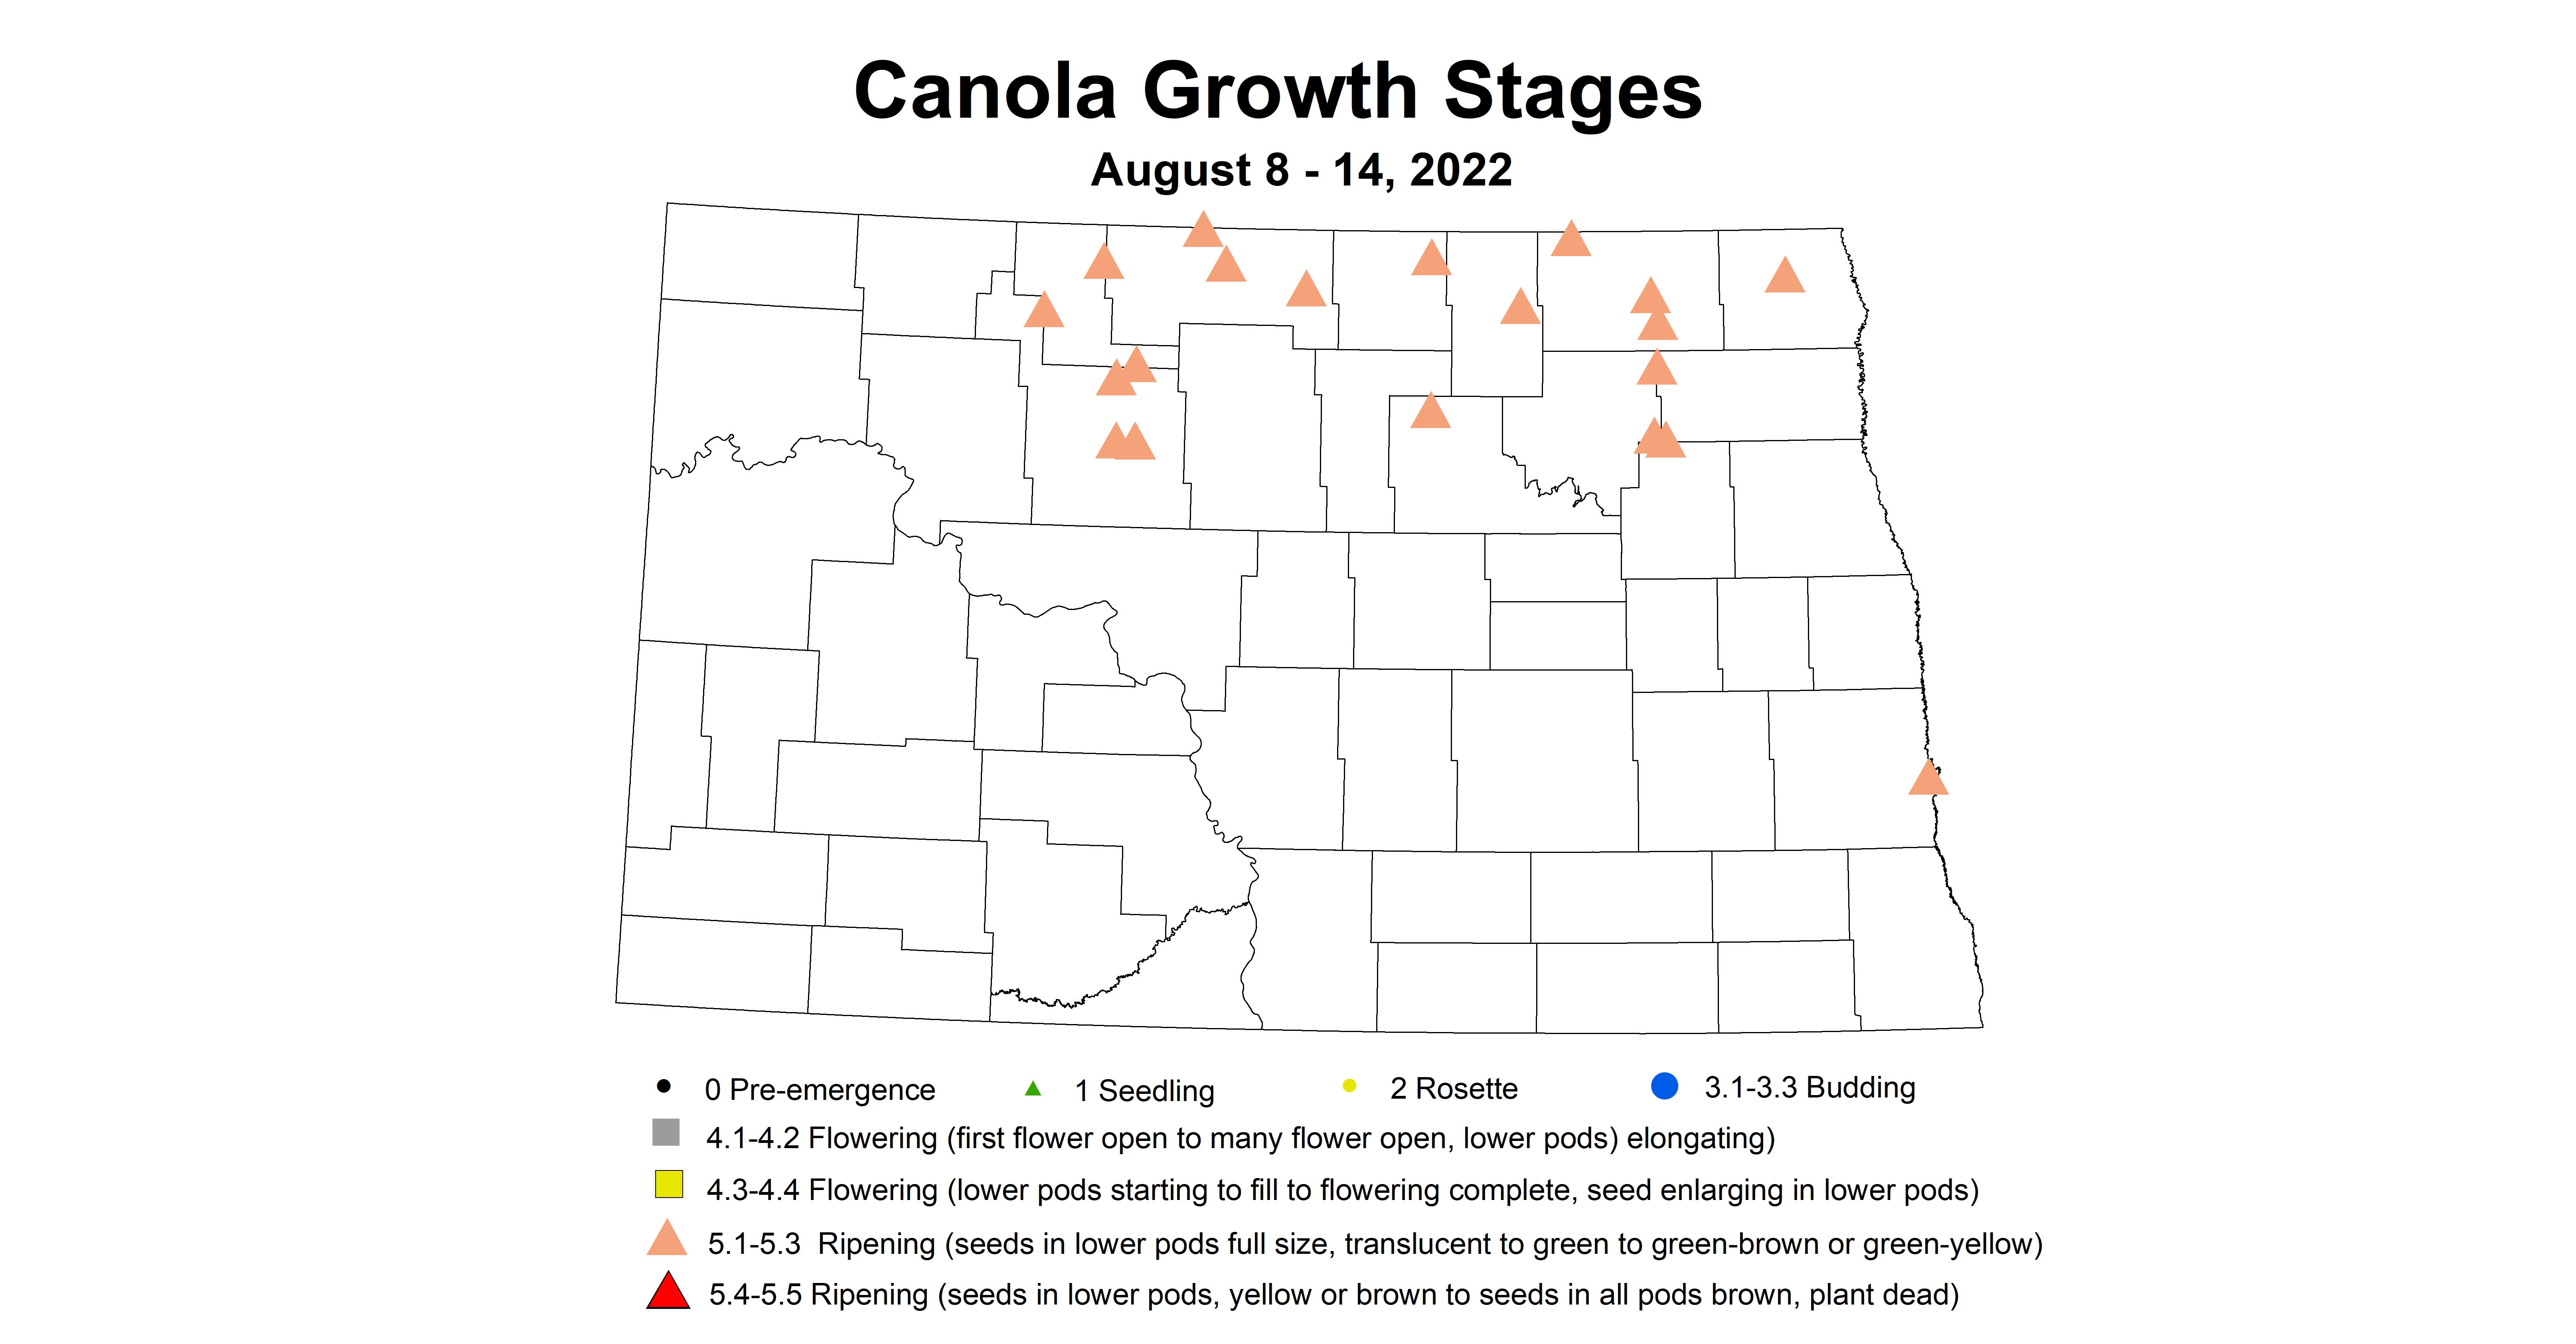 canola growth stages 2022 8.8-8.14